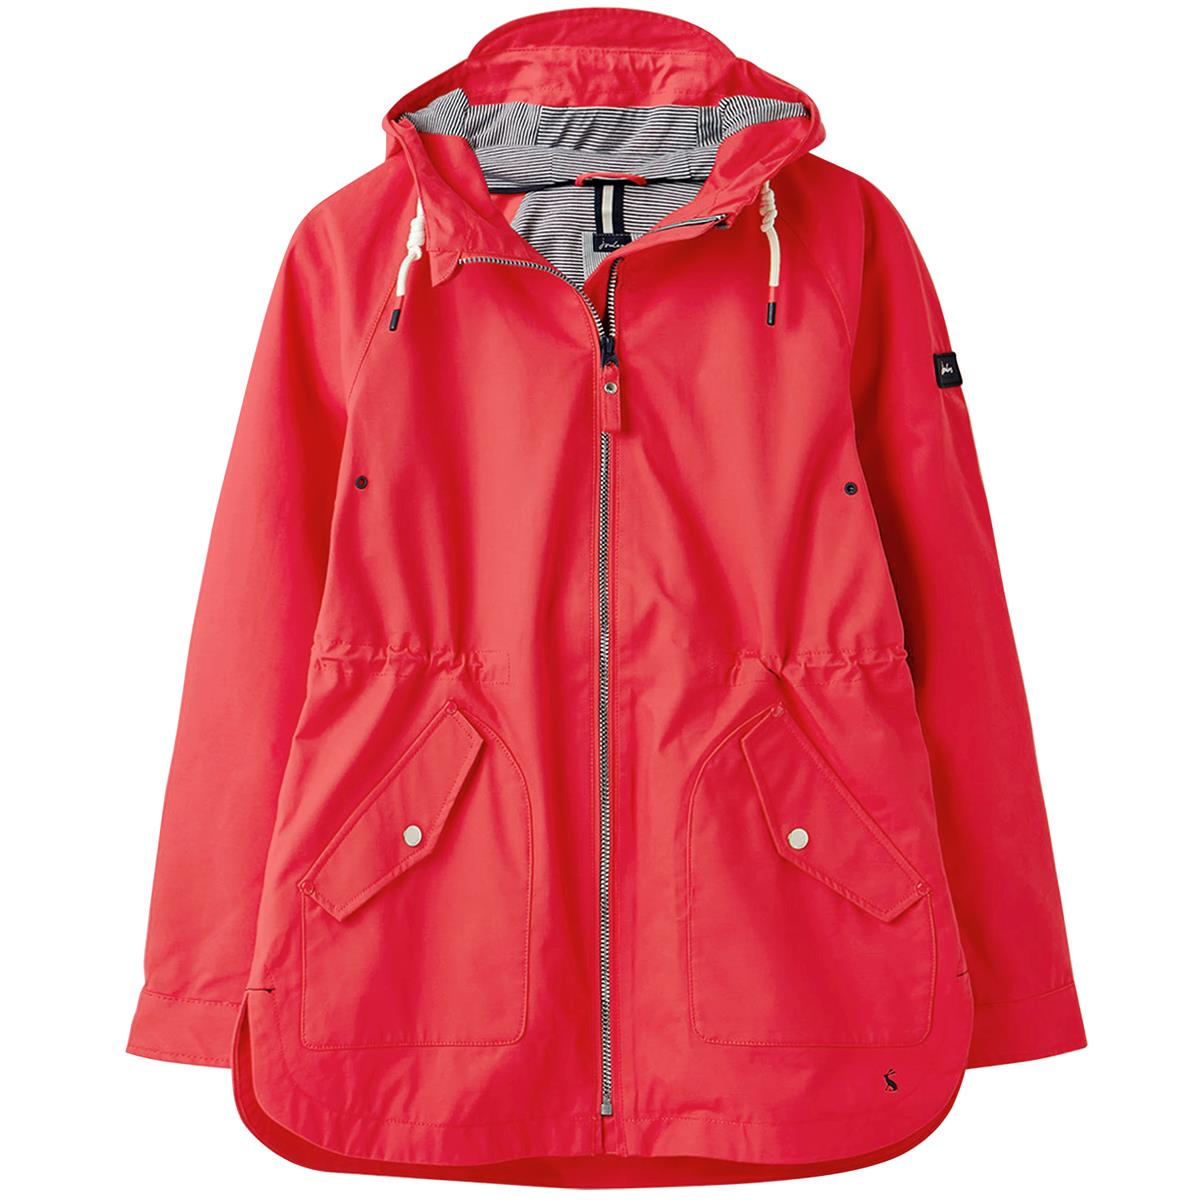 What's the best way to clean the Joules Shoreside Coastal Waterproof Jacket?